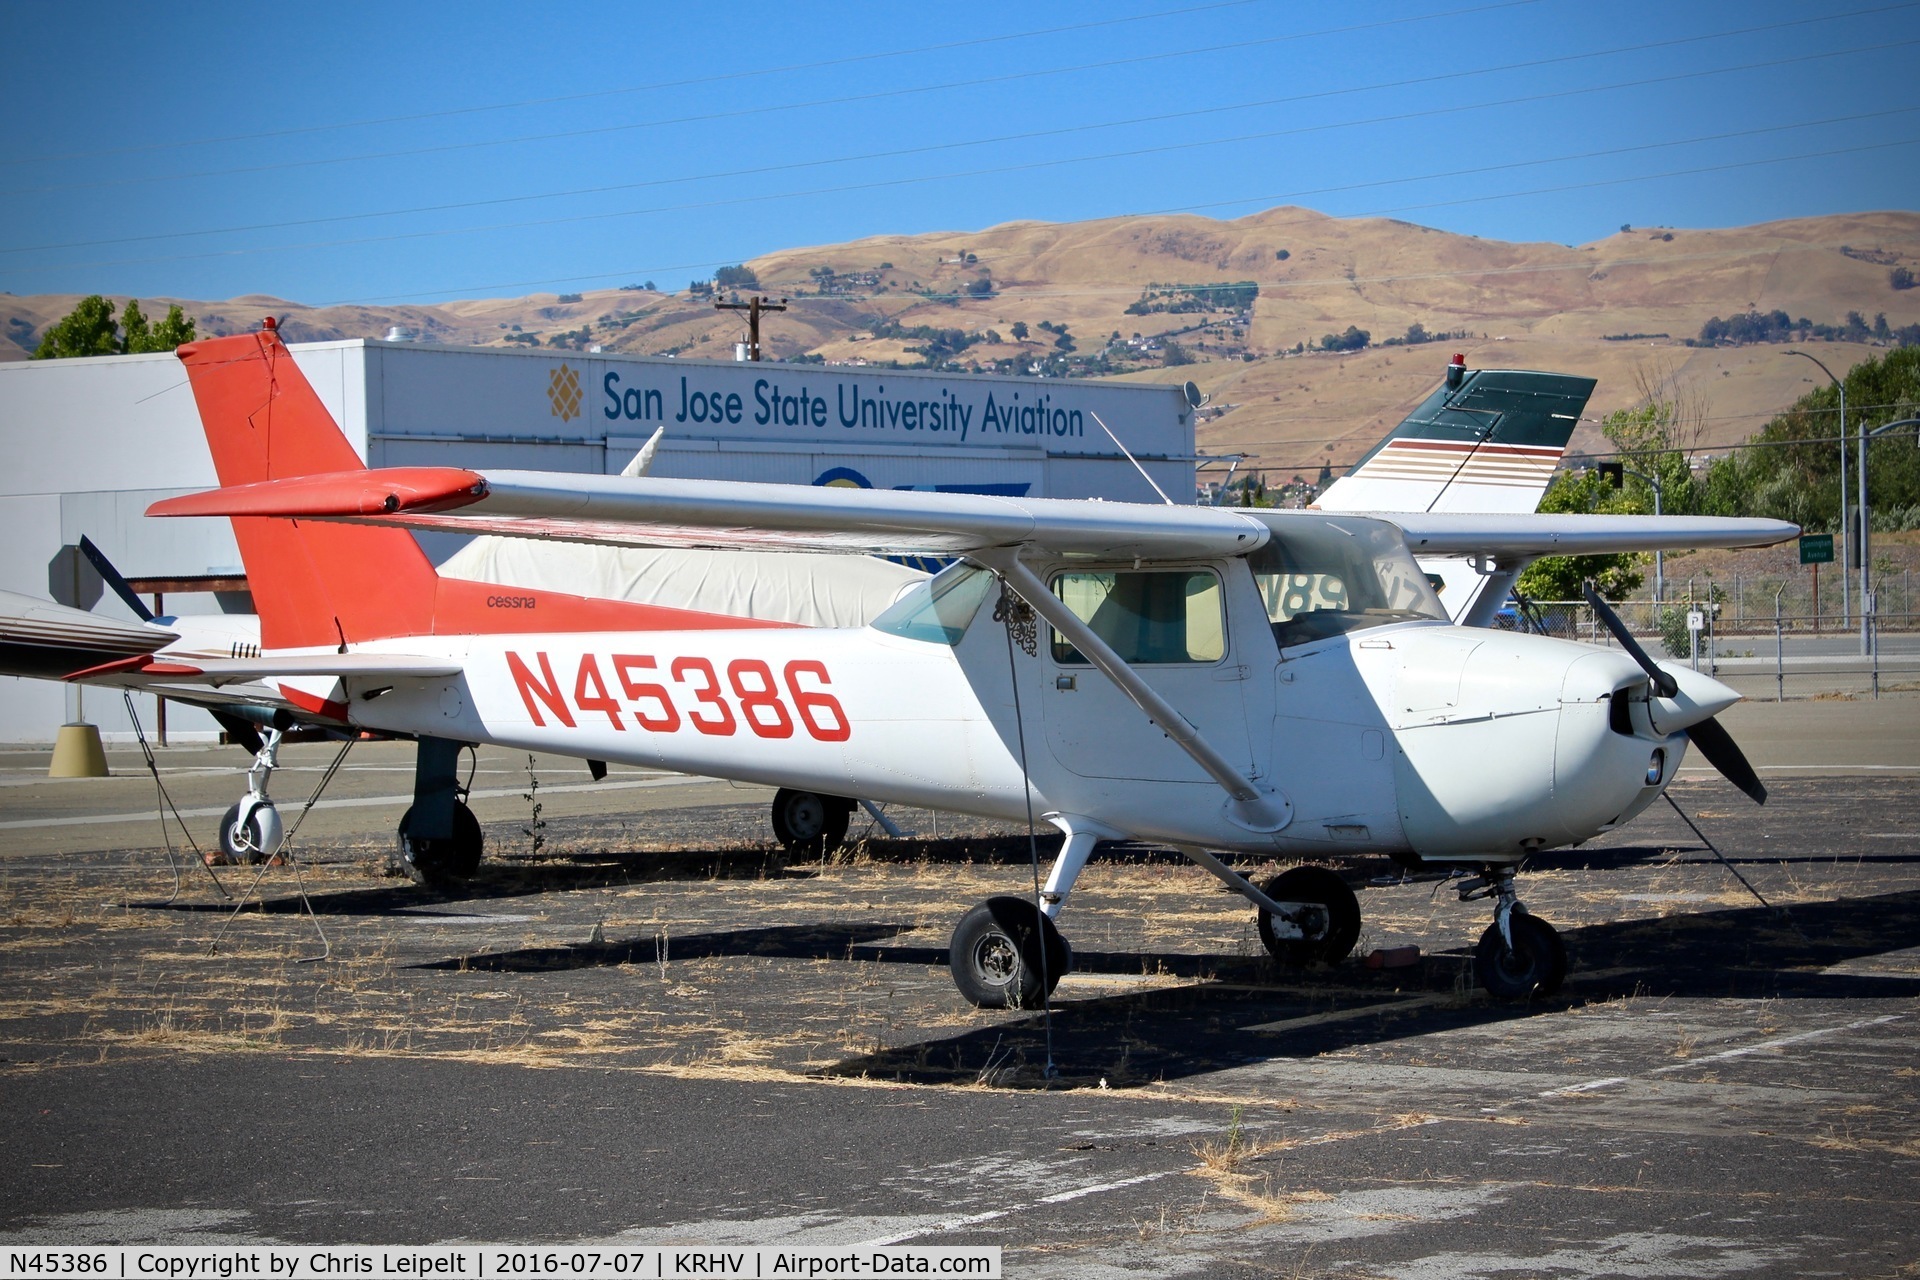 N45386, 1975 Cessna 150M C/N 15076895, SJSU (San Jose, CA) 1975 Cessna 150M parked with their hangar in the background at Reid Hillview Airport, San Jose, CA.